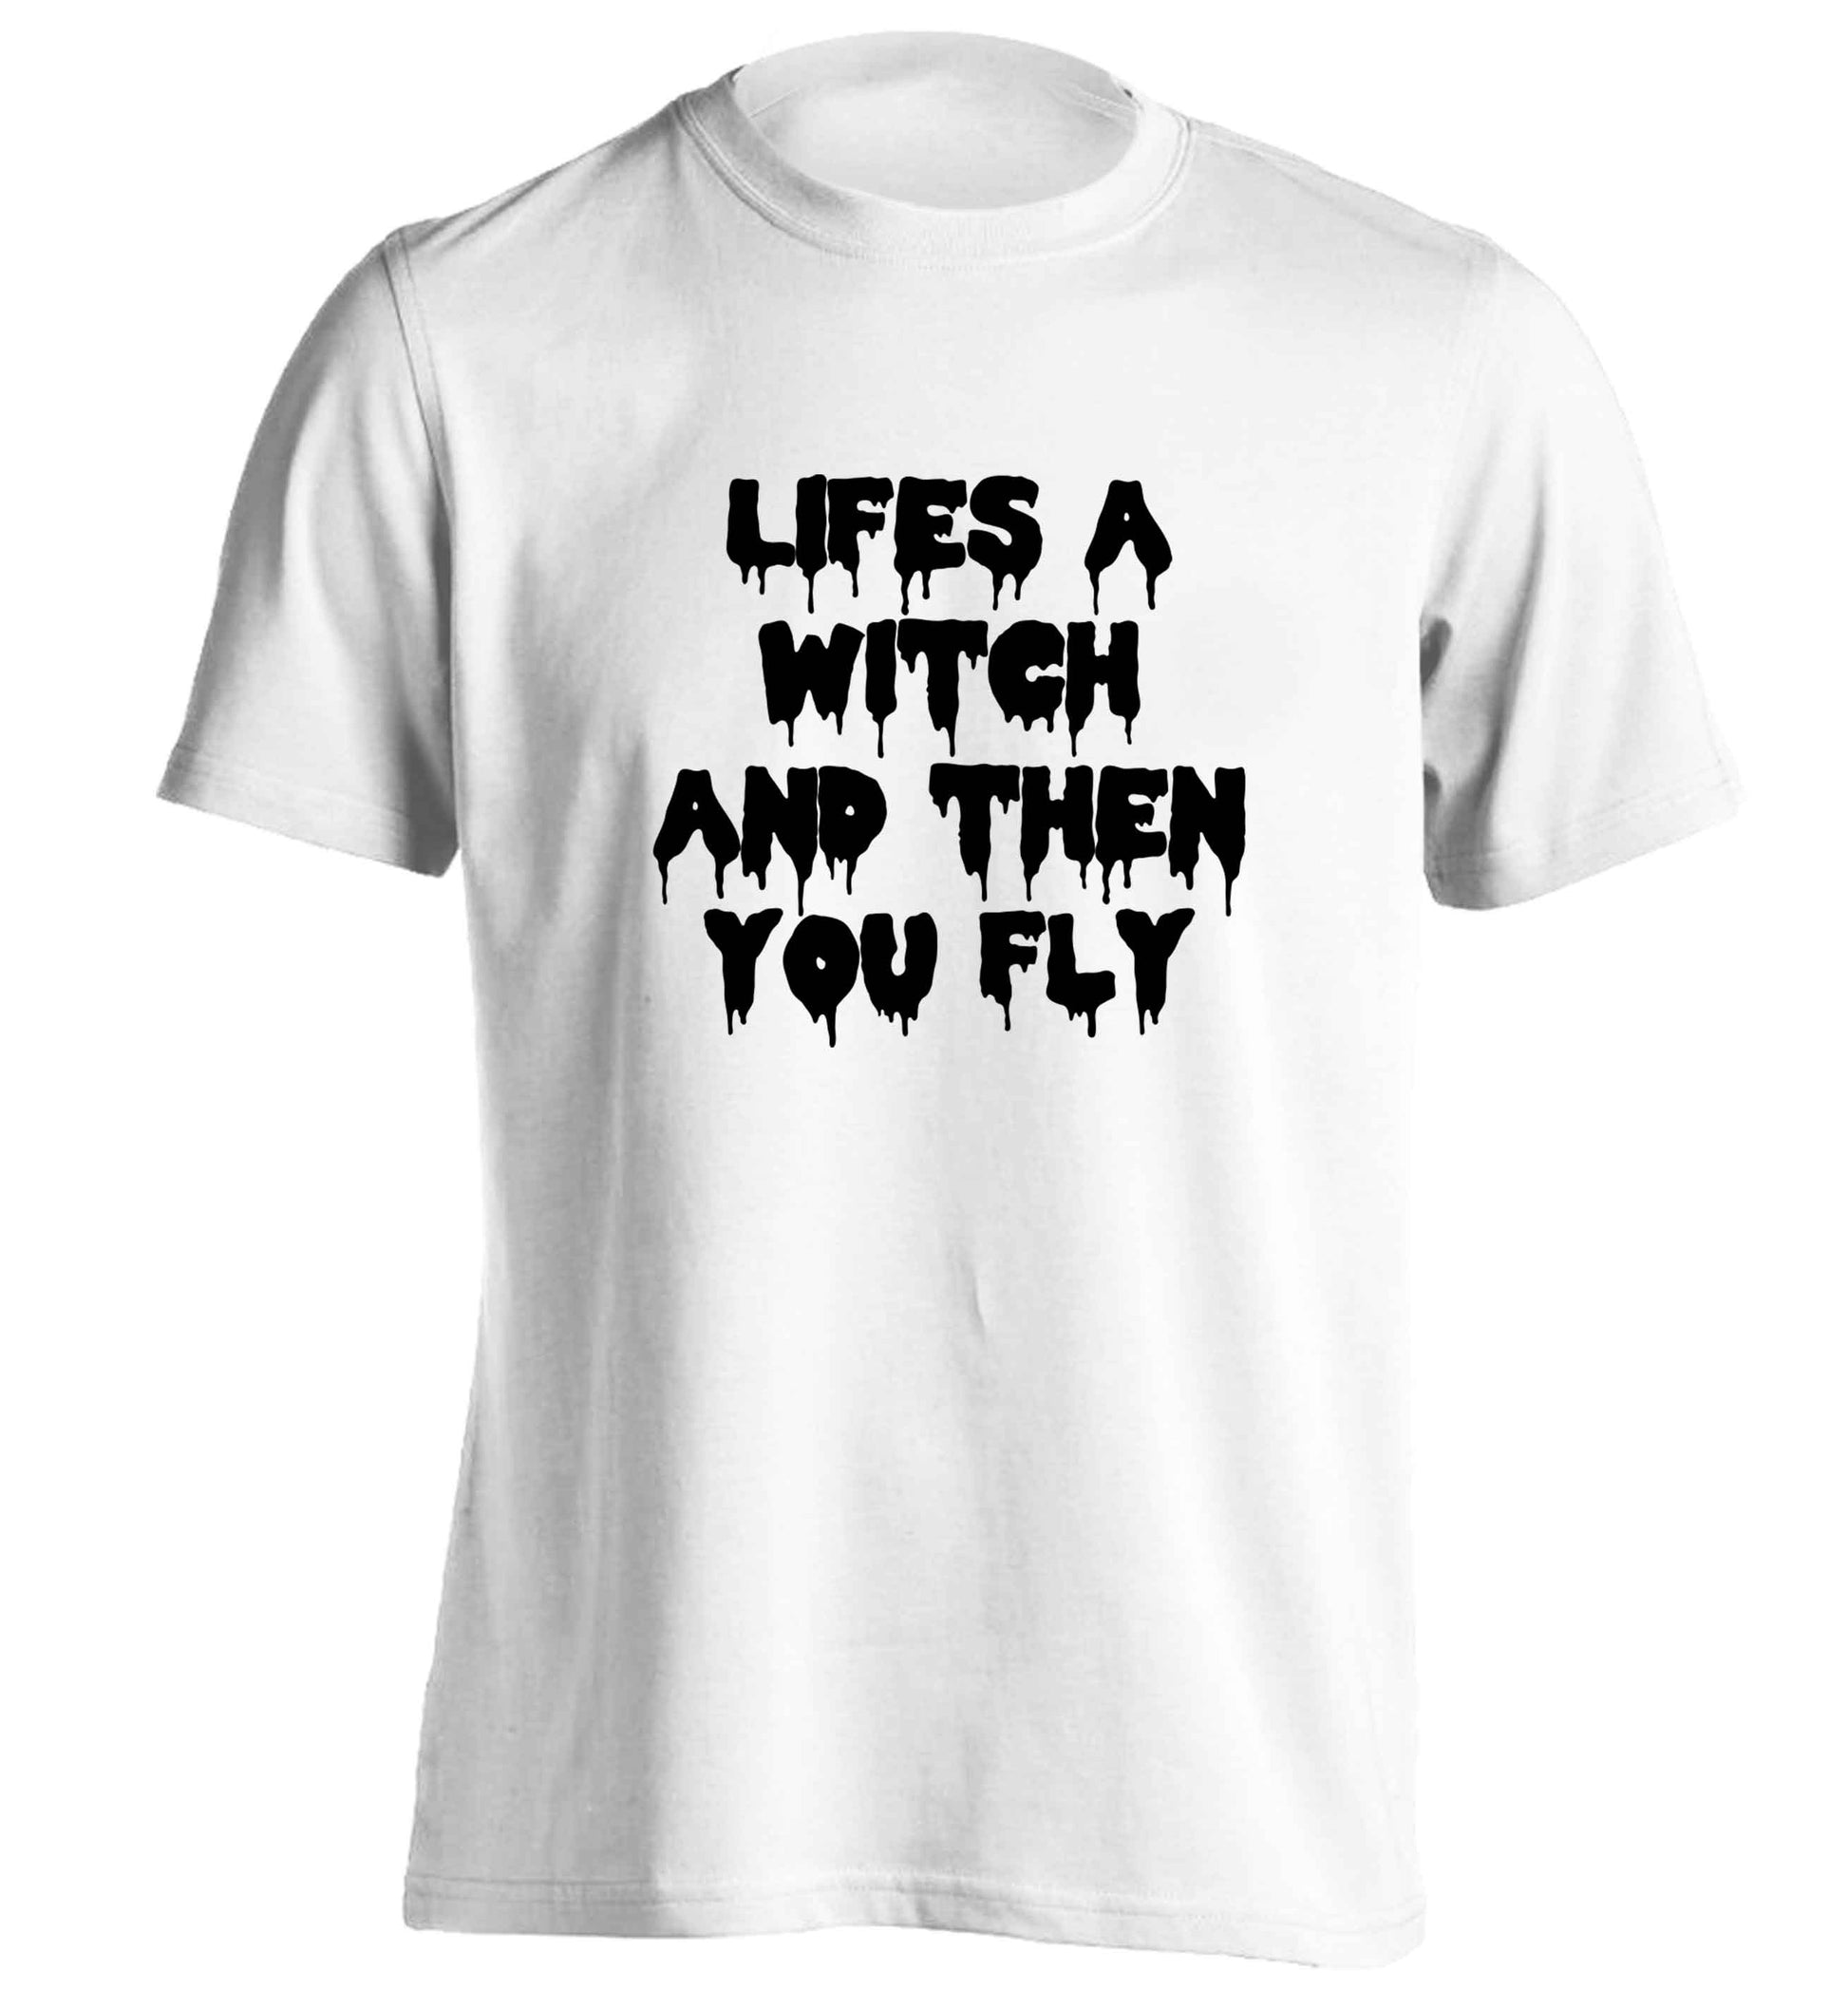 Life's a witch and then you fly adults unisex white Tshirt 2XL